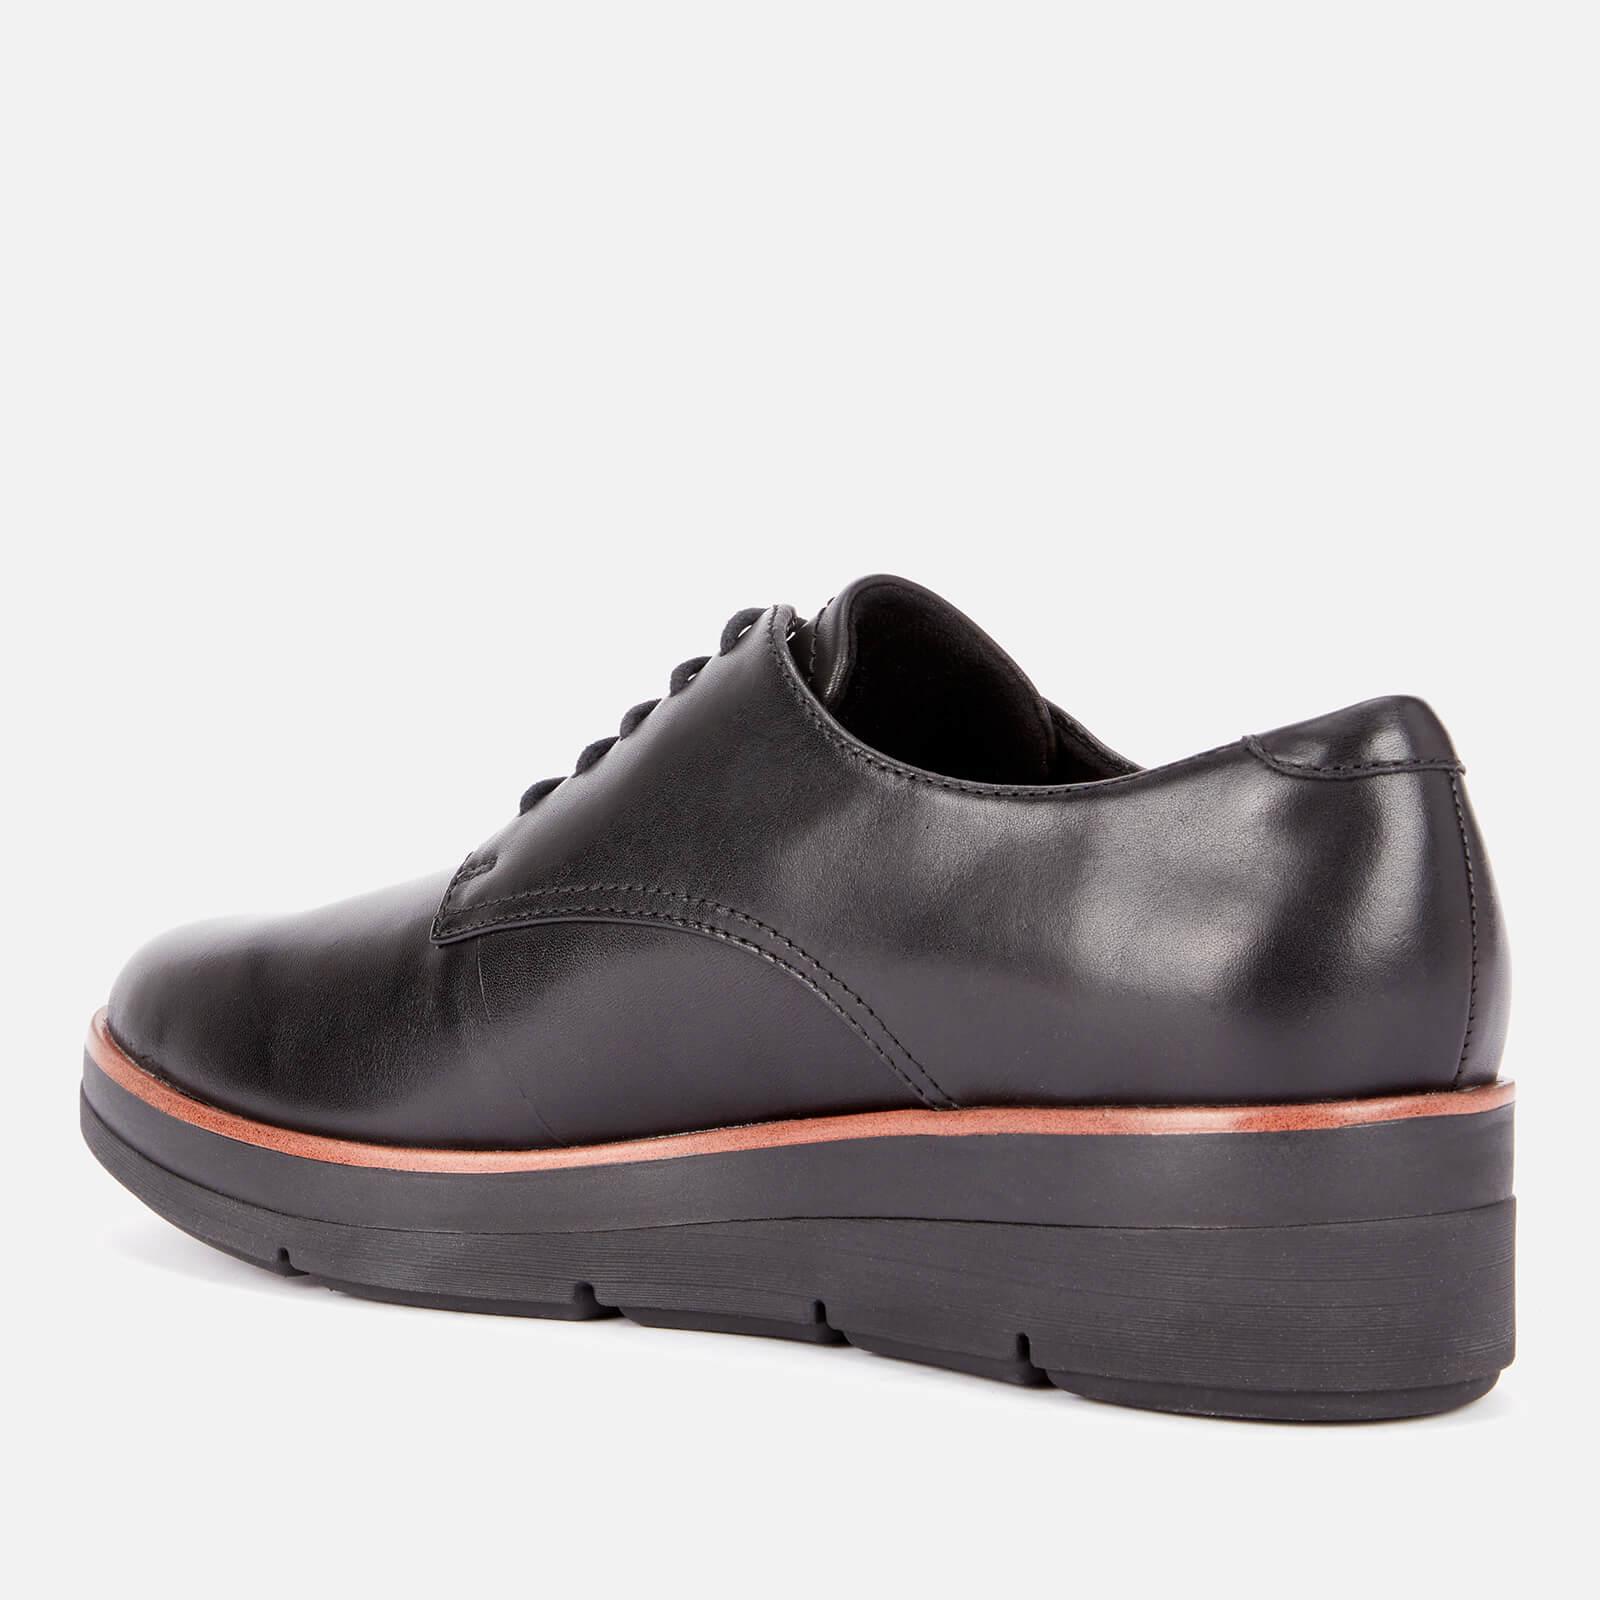 Clarks Shaylin Lace Leather Shoes in Black - Lyst